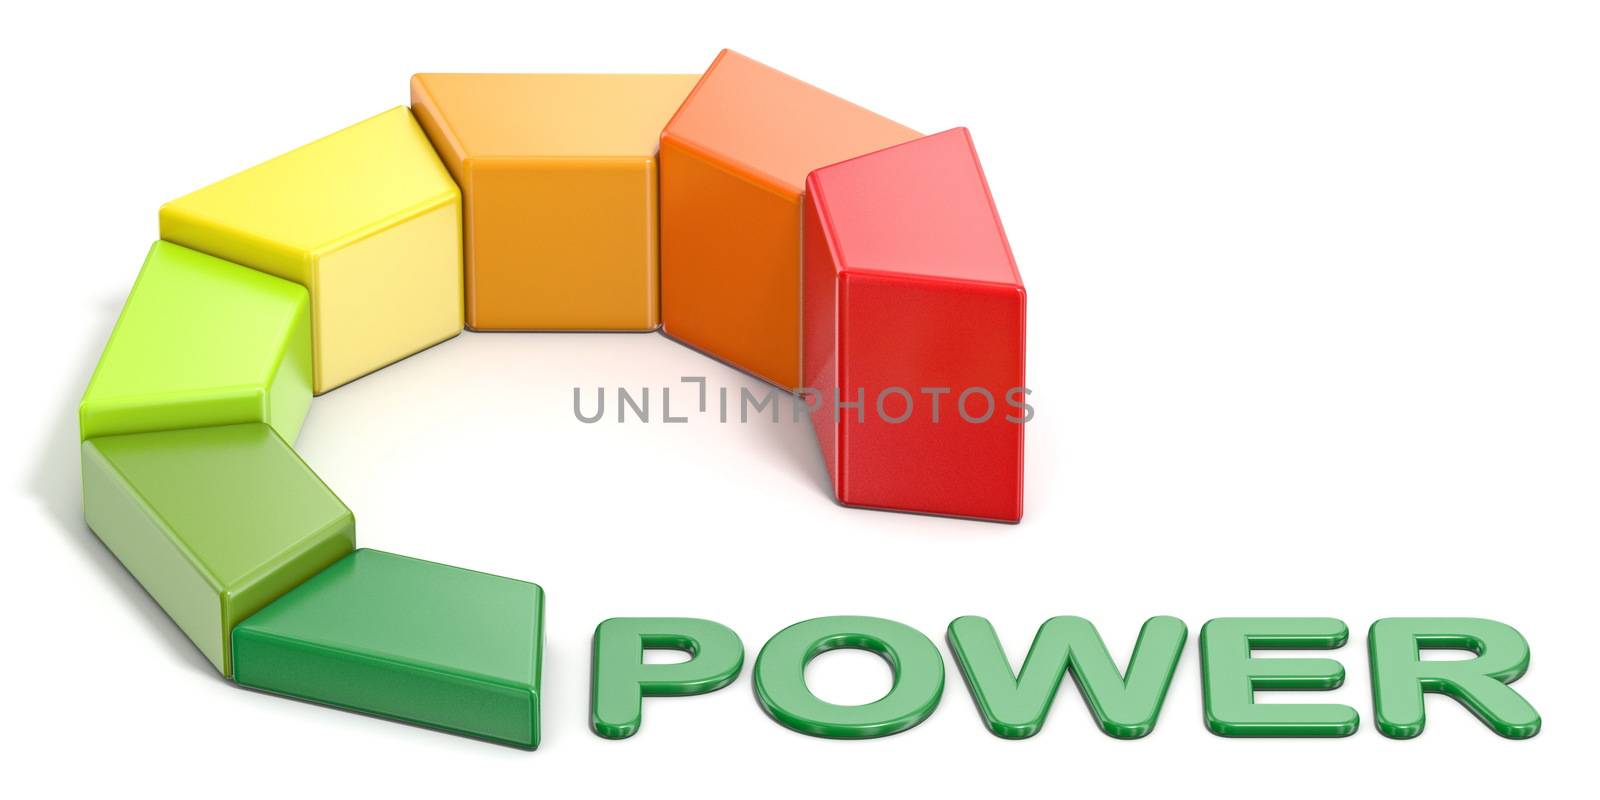 Energetic efficiency Green Power text 3D render illustration isolated on white background